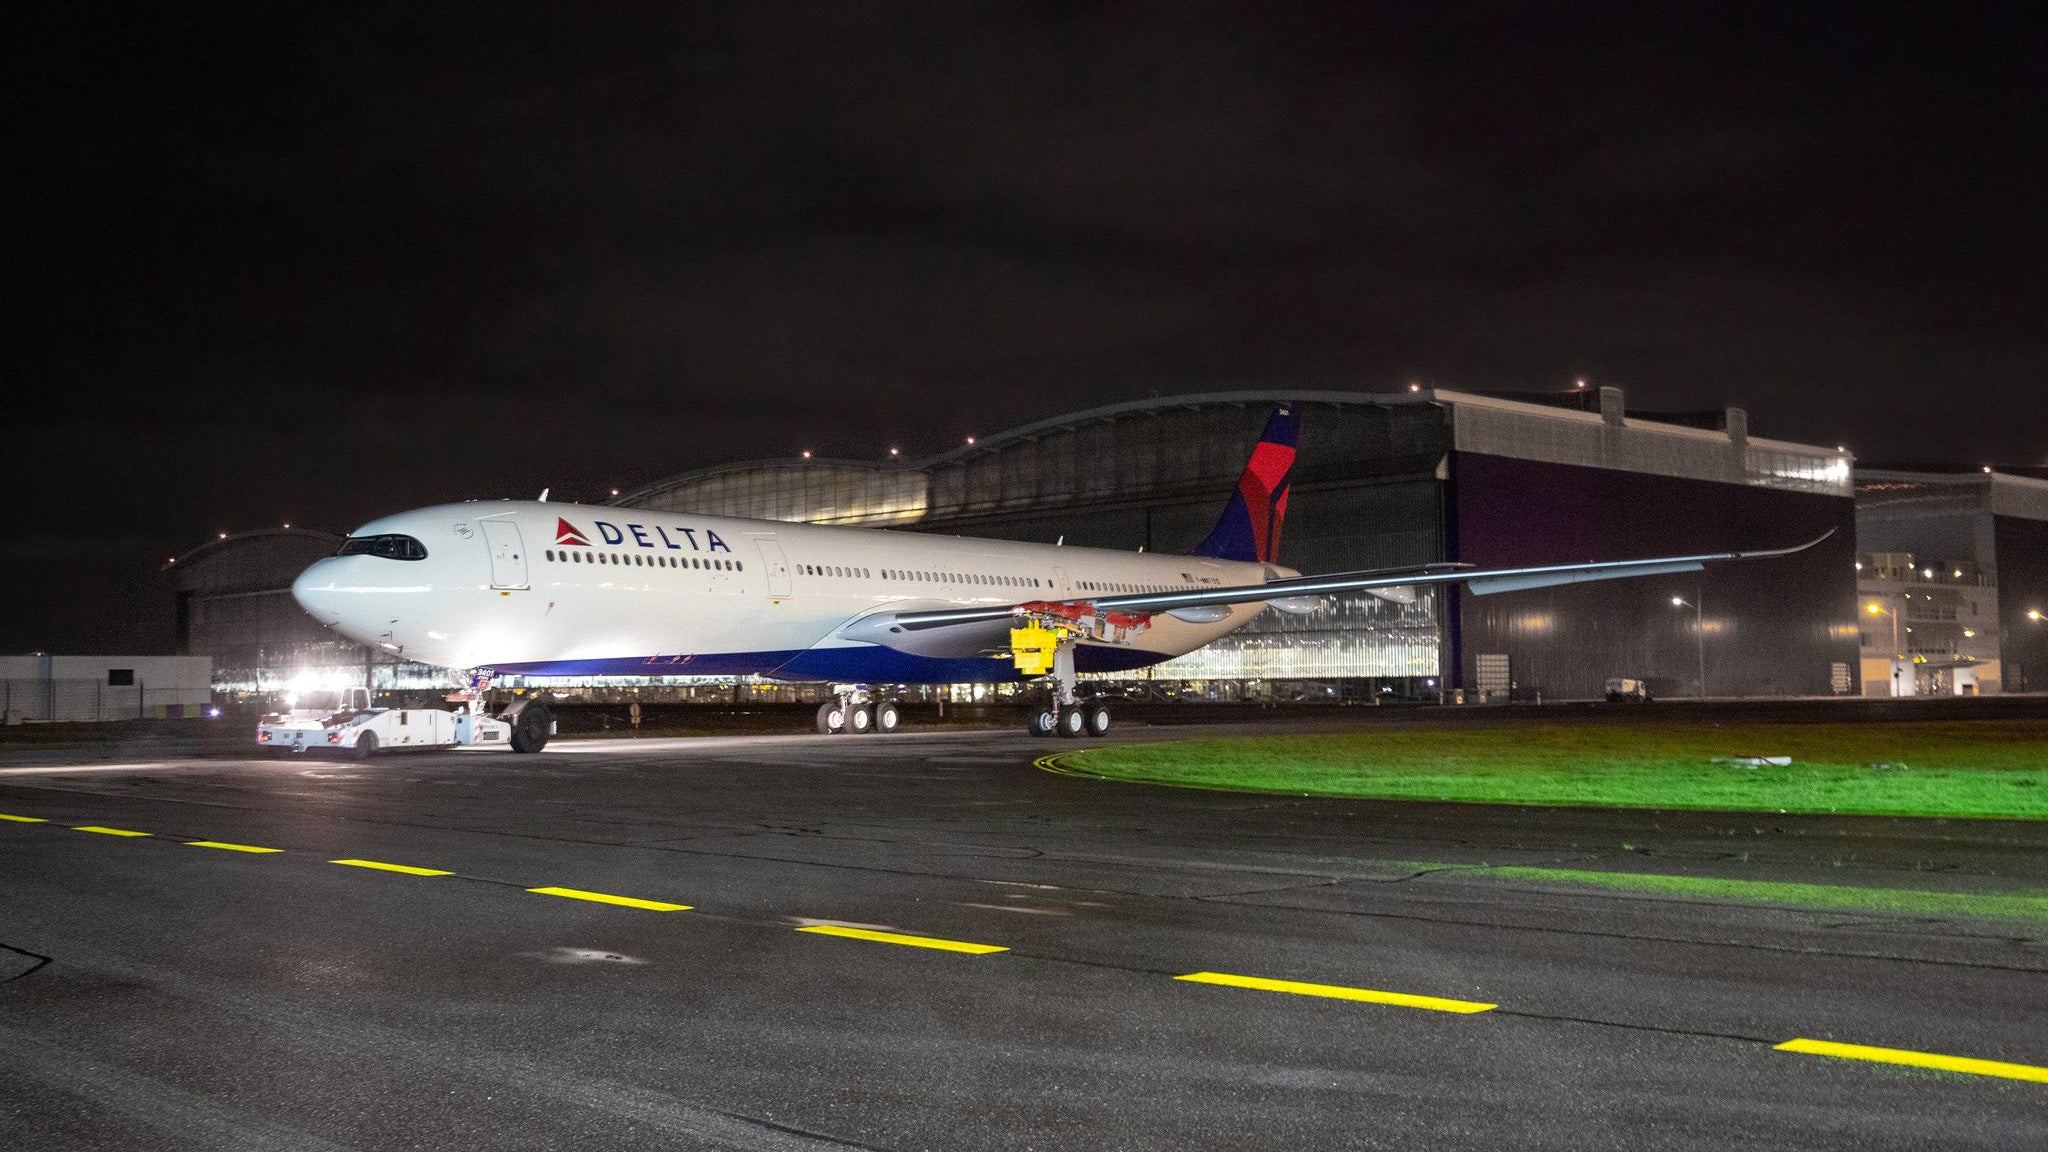 Delta-A330-900neo-first-paint-airbus